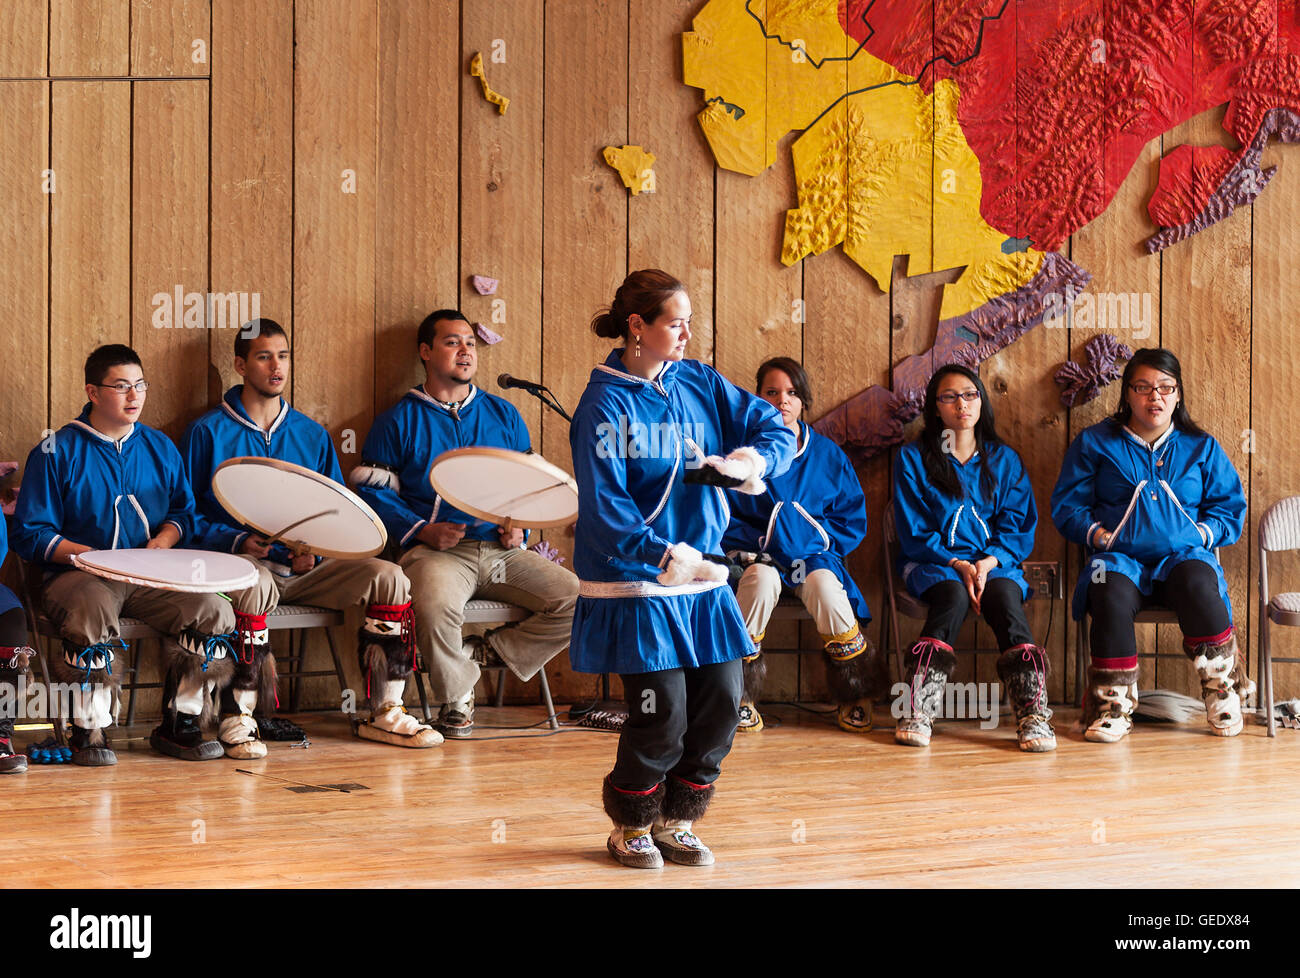 Native Alaskan youth demonstrates the traditional dance of her culture at the Native Alaskan Heritage Center, Anchorage, Alaska. Stock Photo